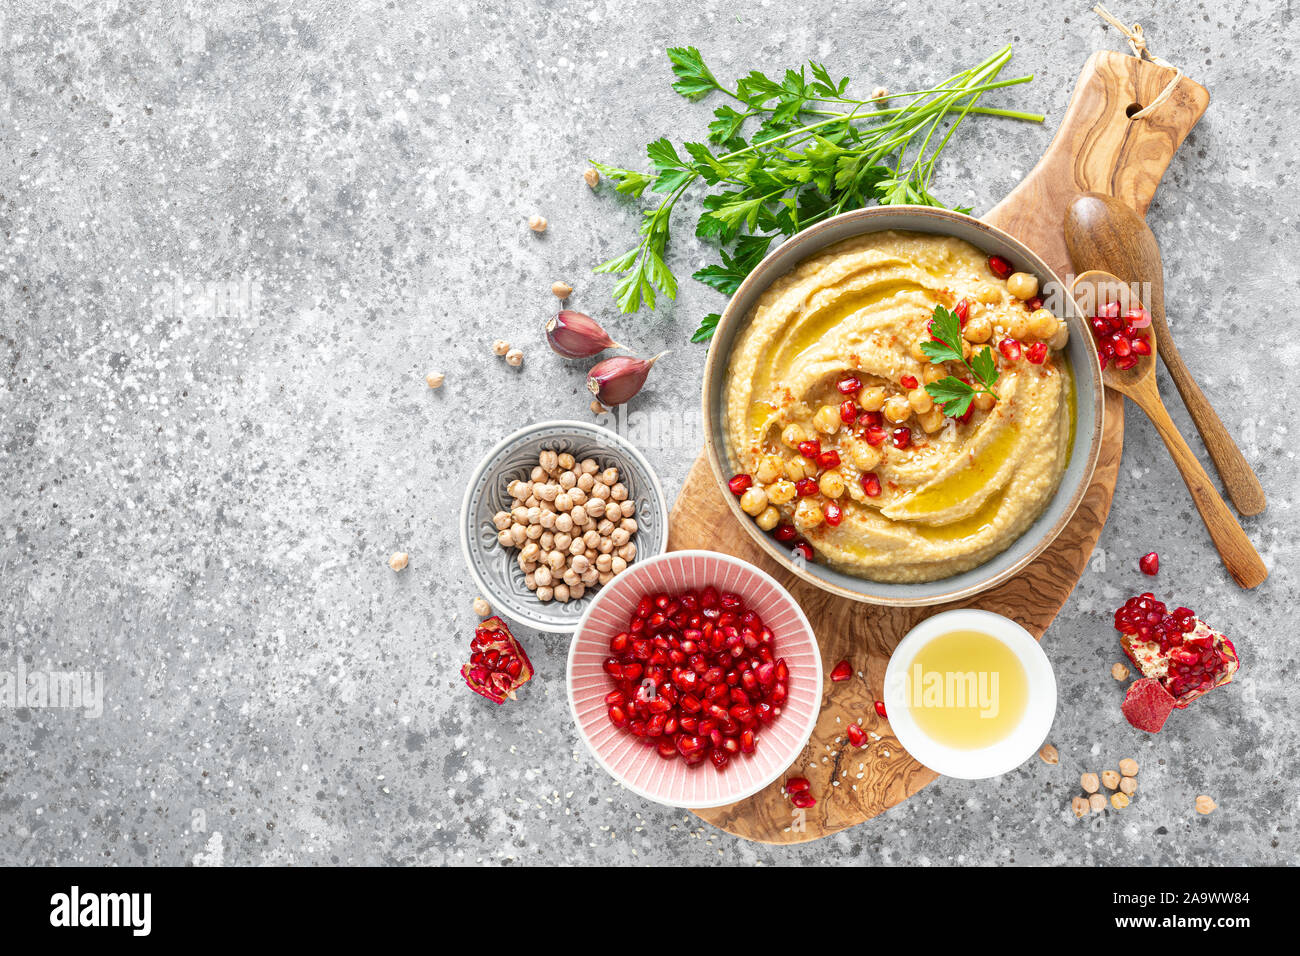 Chickpea hummus with tahini in a bowl. Healthy vegetarian appetizer. Middle Eastern cuisine Stock Photo